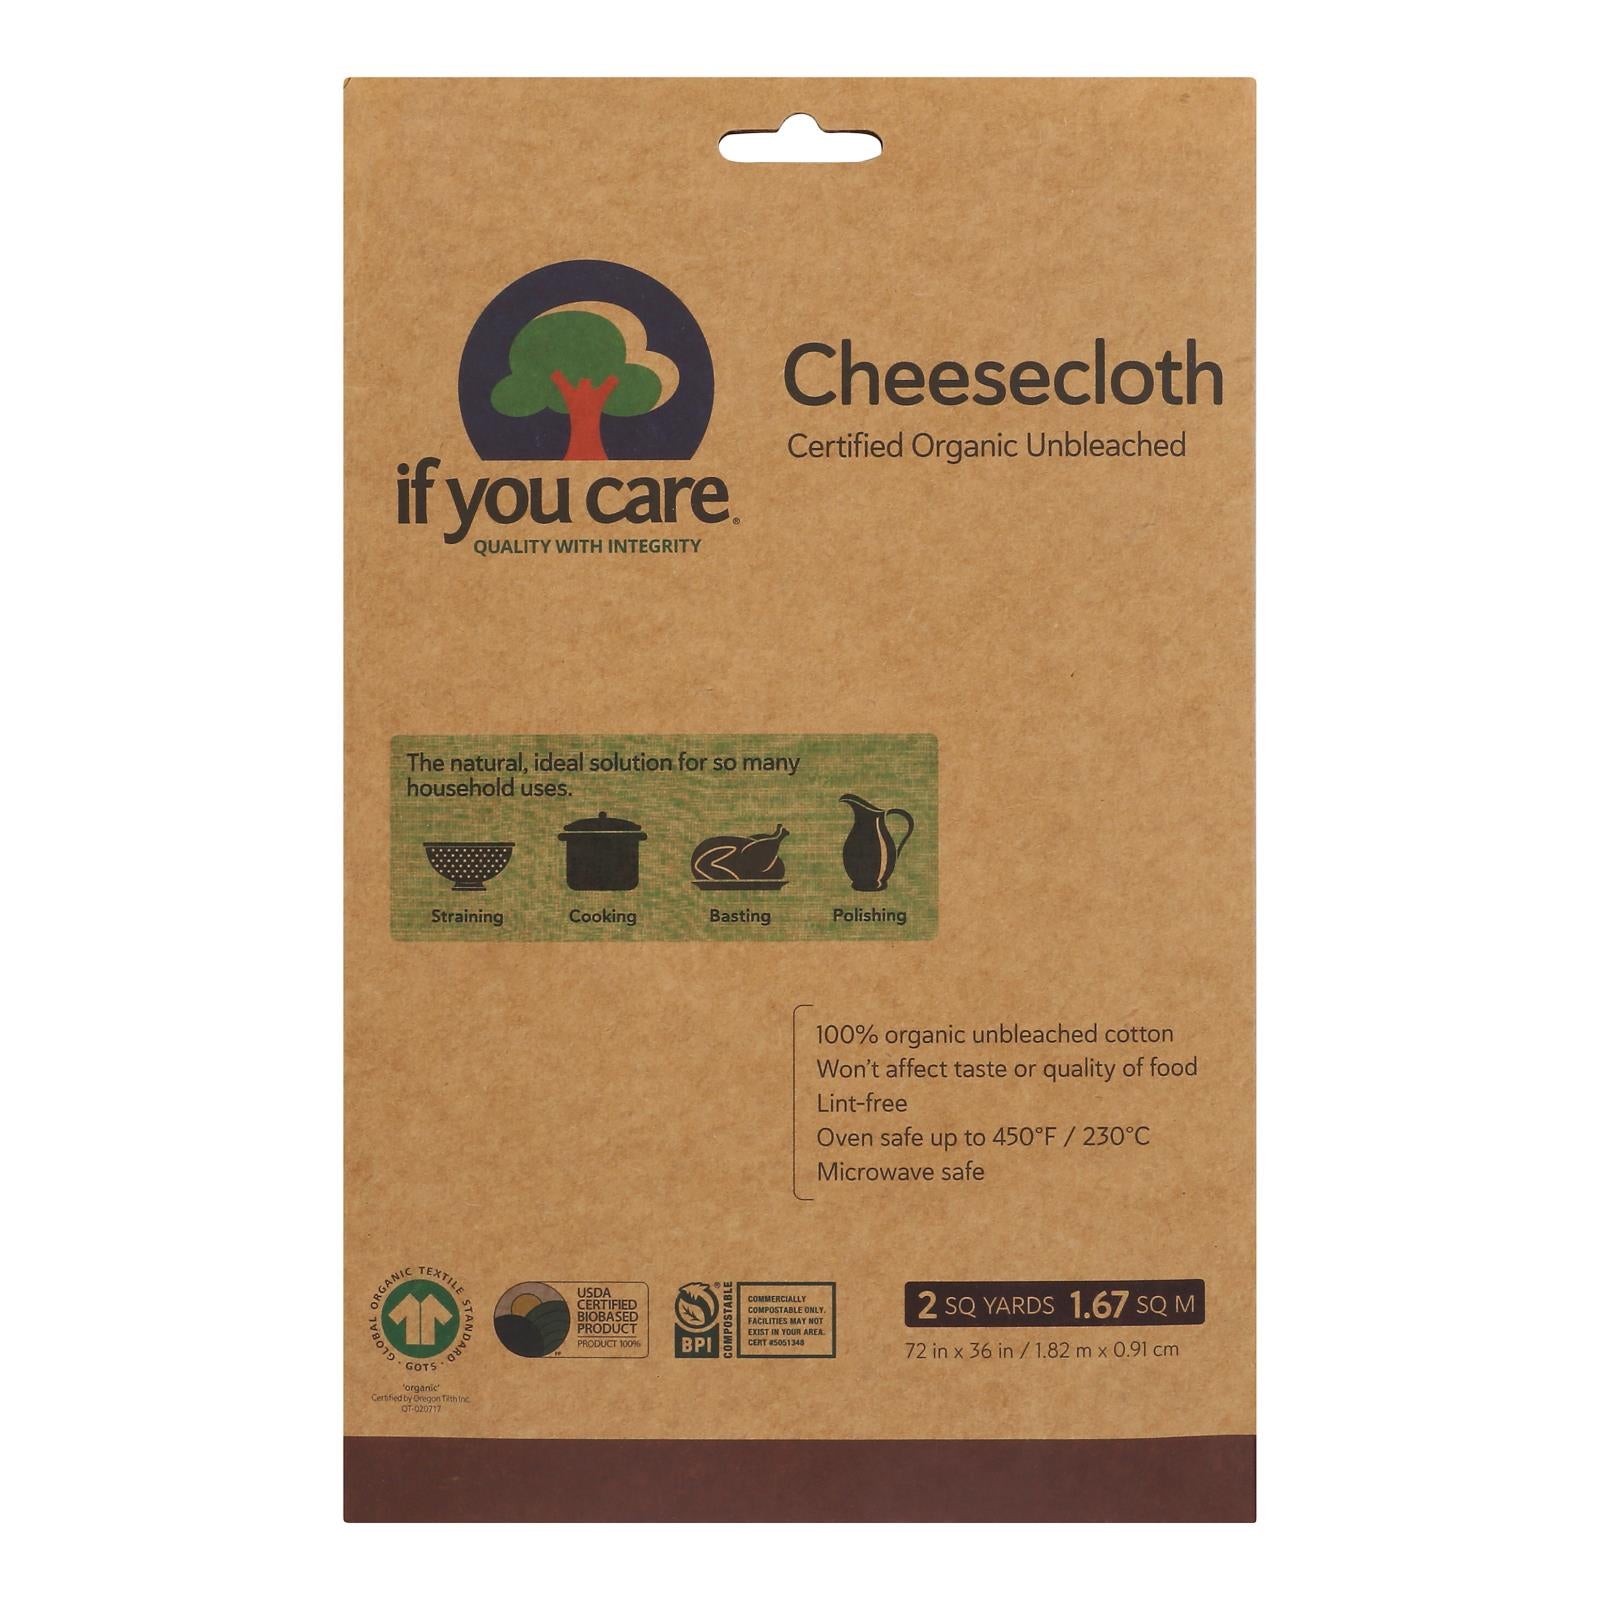 If You Care Cheesecloth - Unbleached - Case Of 24 - 2 Yard